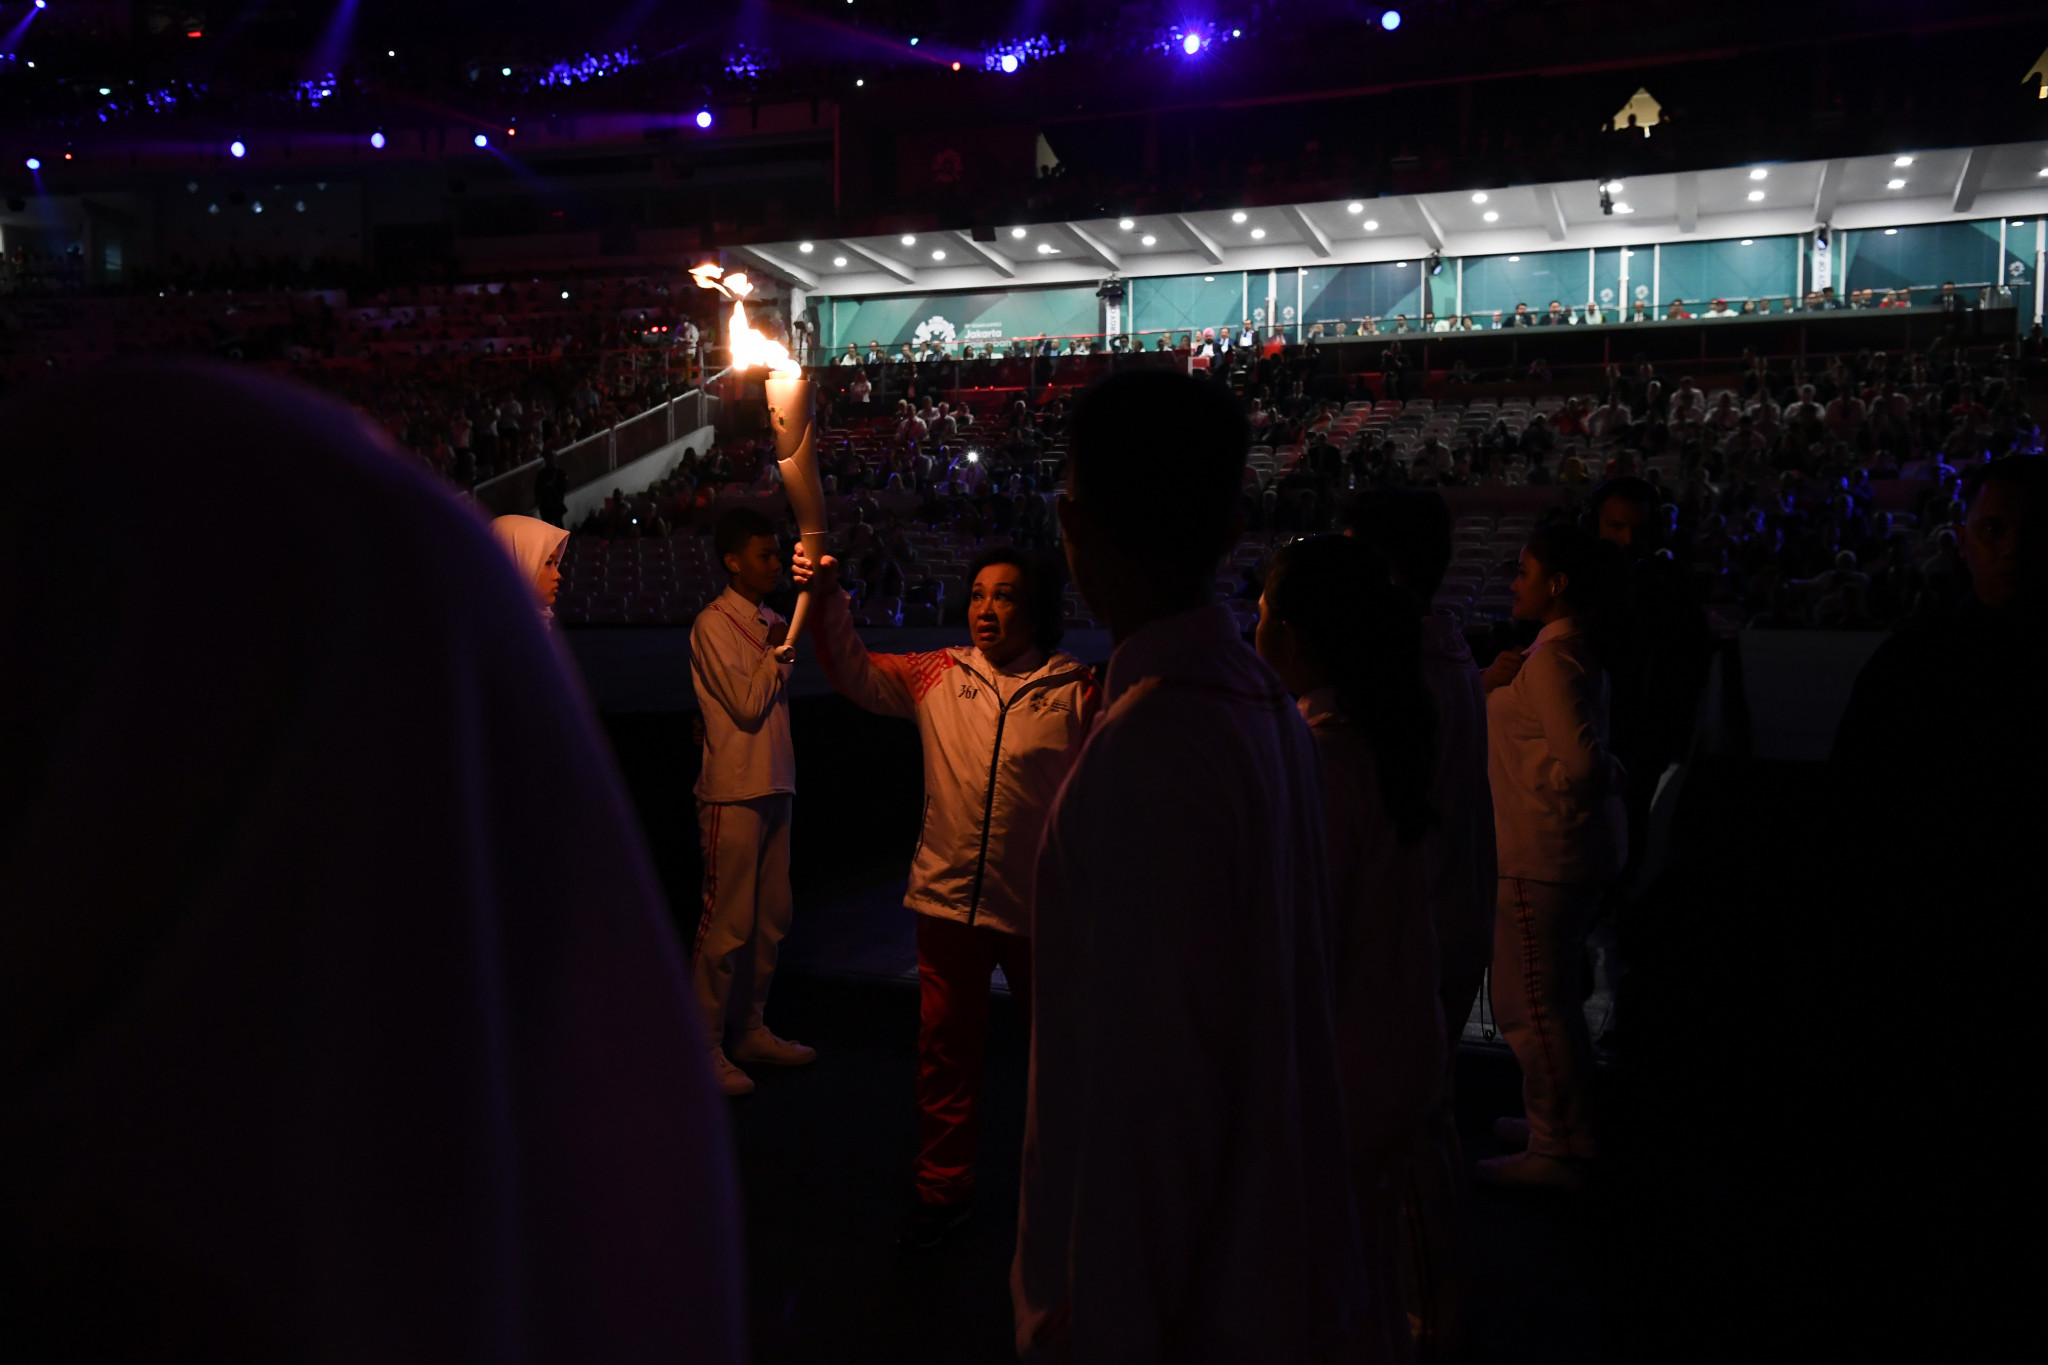 Having started its relay in New Delhi as is tradition, the flame arrived into the Stadium initially unnoticed ©Getty Images